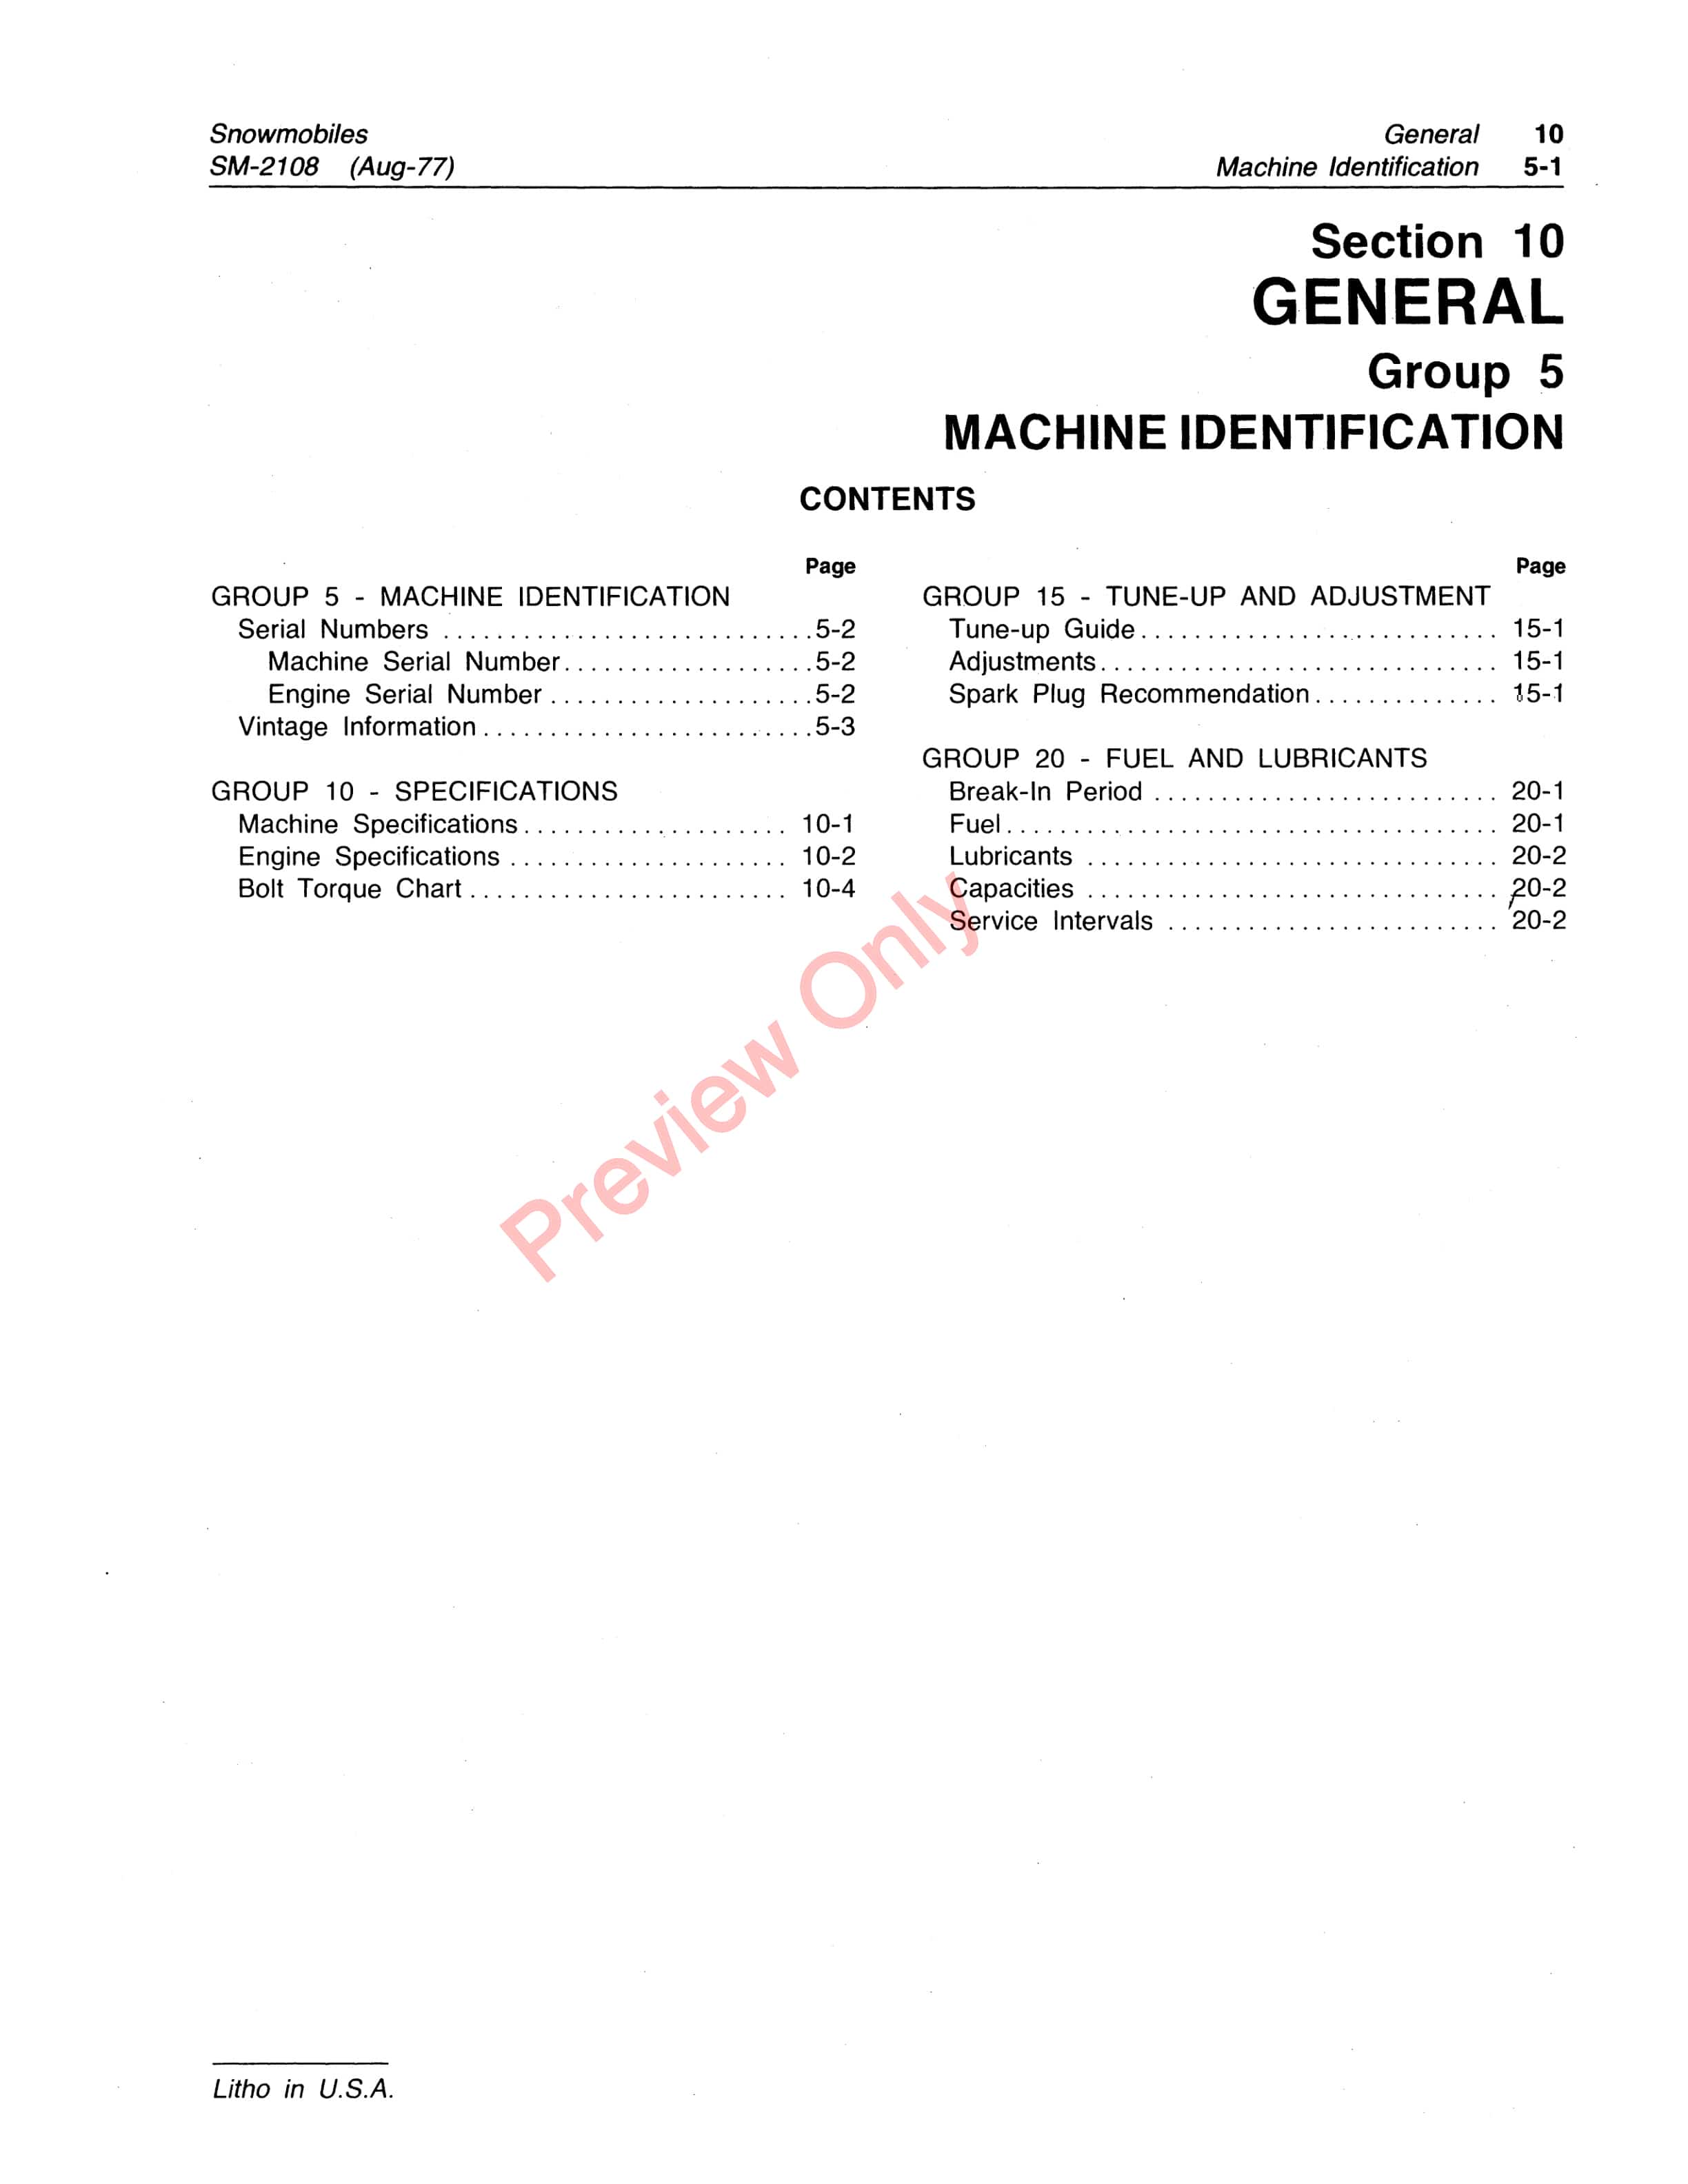 John Deere 340 And 440 Snowmobiles Cyclone And Liquifire Service Manual SM2108 01AUG77 5